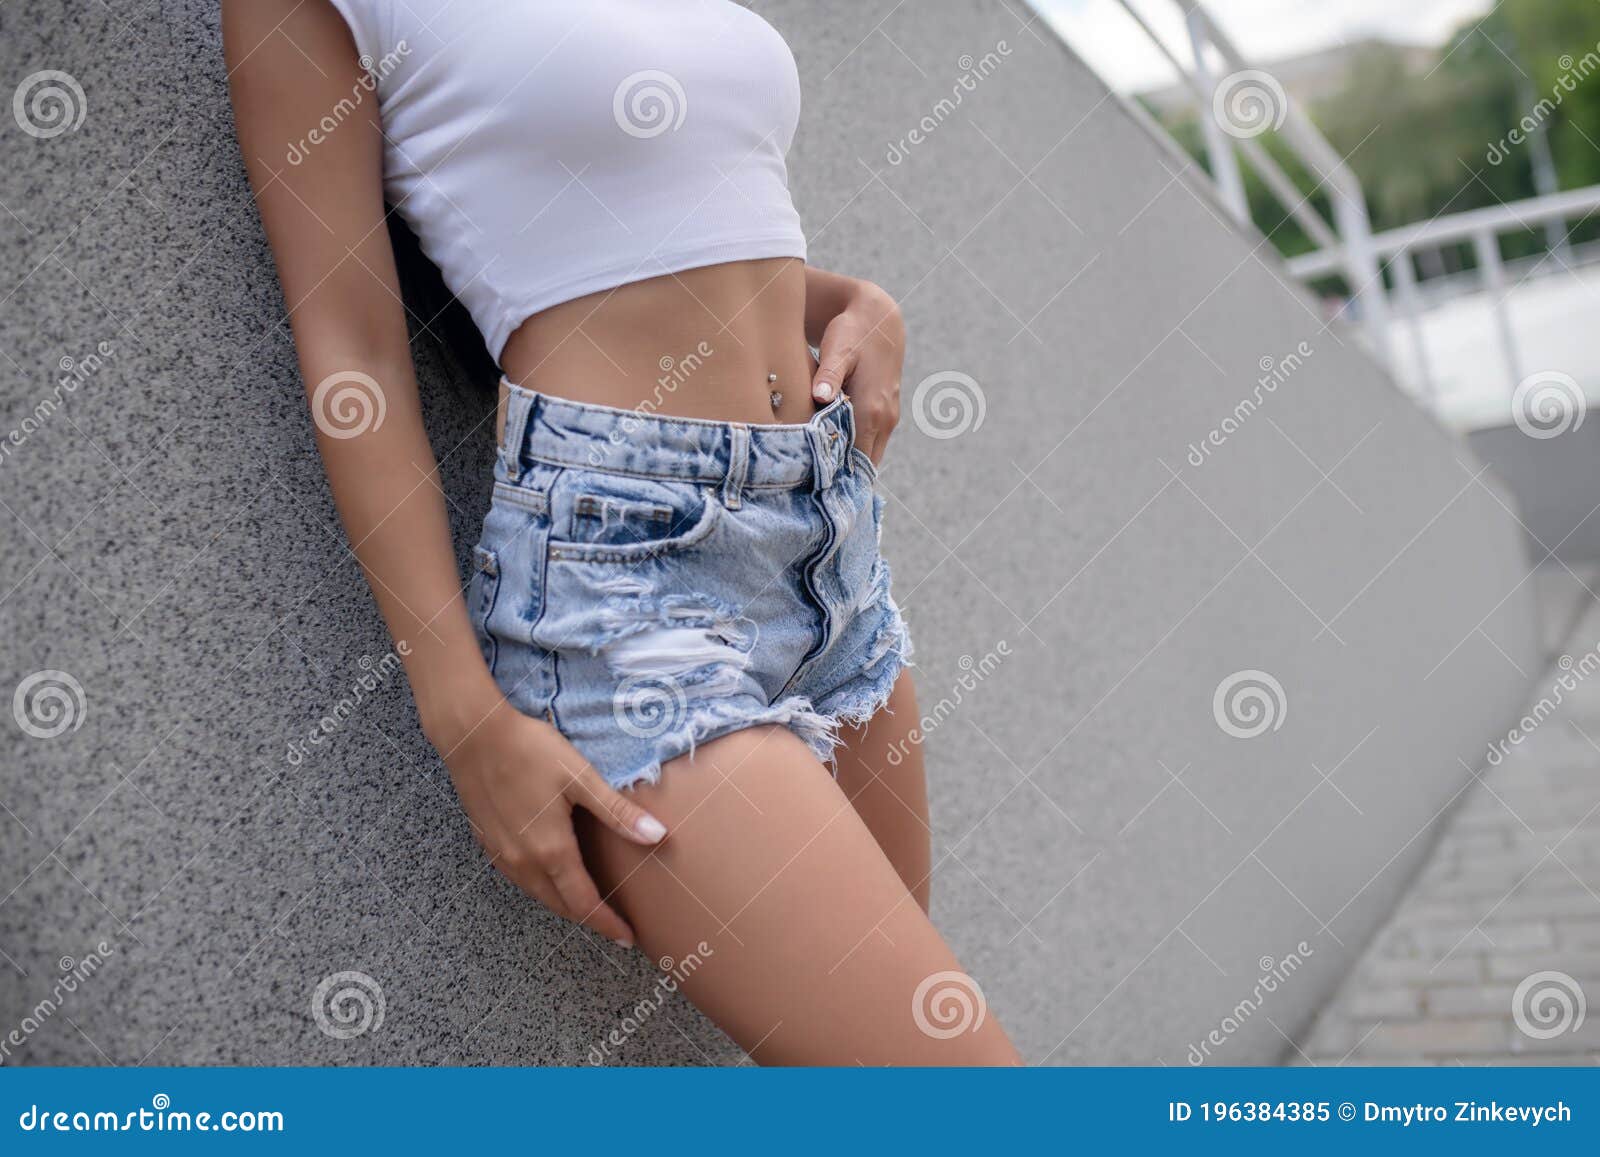 Hot girls in denim 2 303 Young Sexy Girl Jeans Shorts Photos Free Royalty Free Stock Photos From Dreamstime